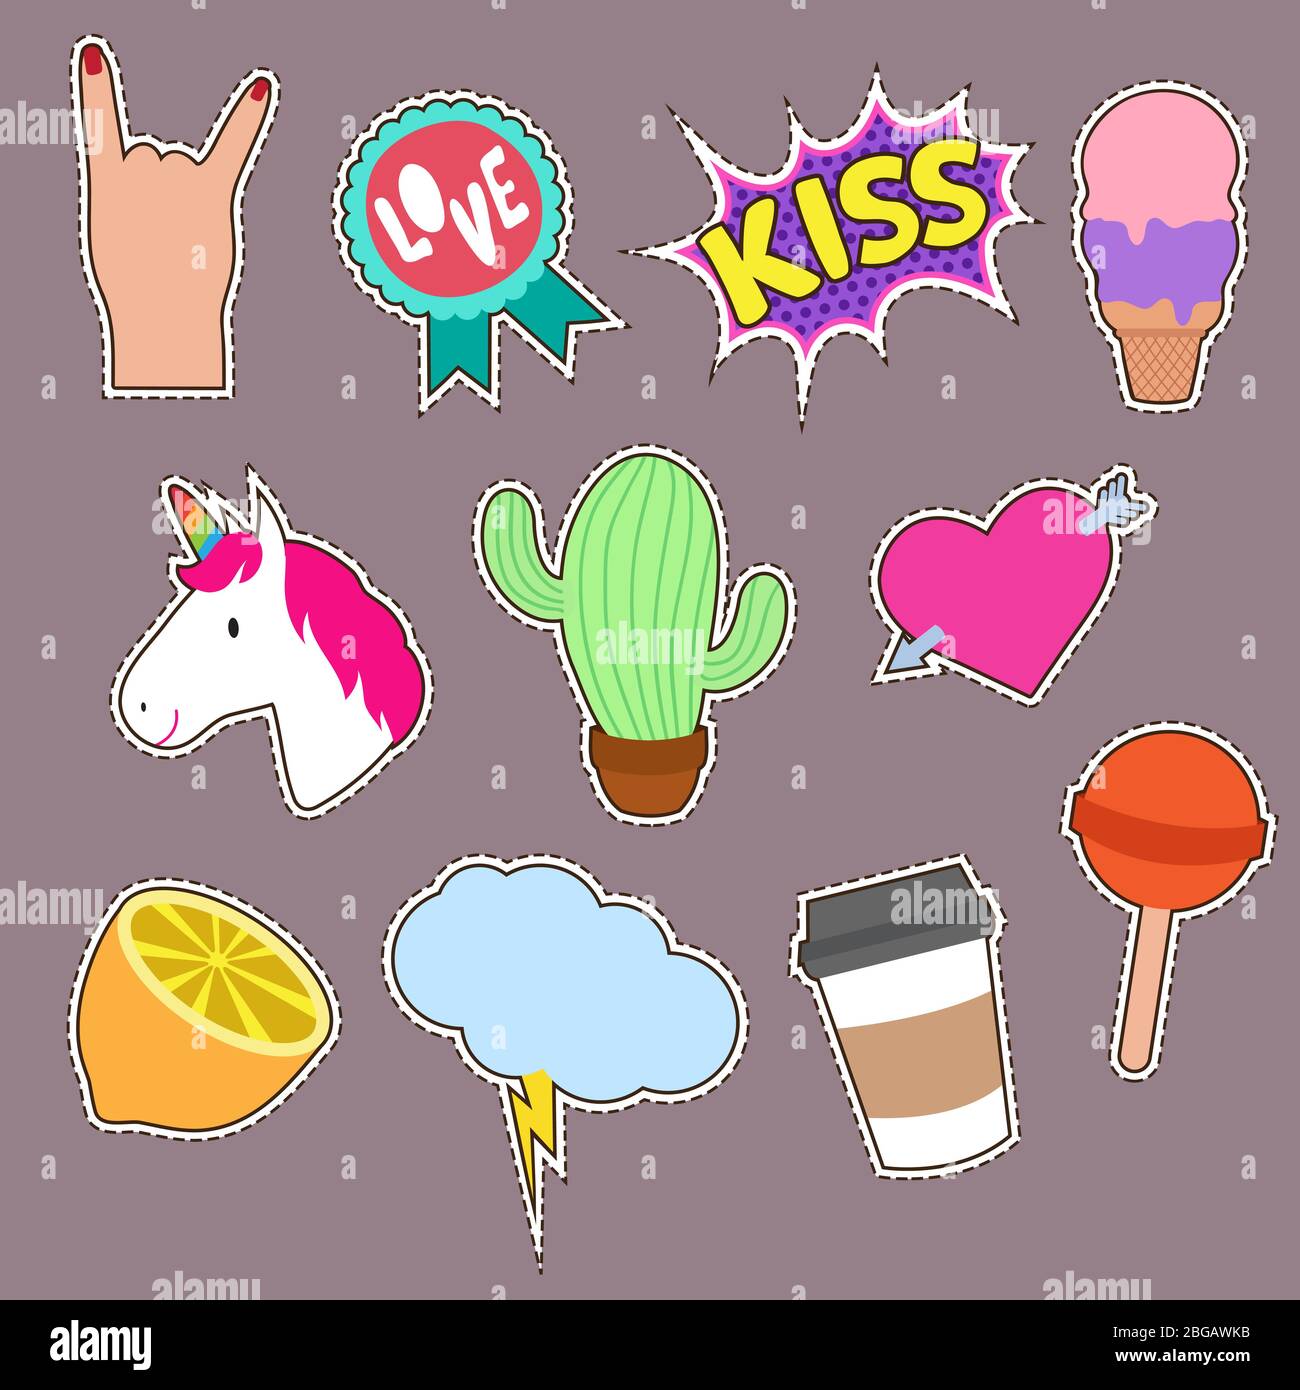 Unicorn, cactus, kiss embroidery word icons. Cute fashion girl patches vector collection. Girl cartoon patch sticker, lollipop and hand gesture, lemon and cactus illustration Stock Vector